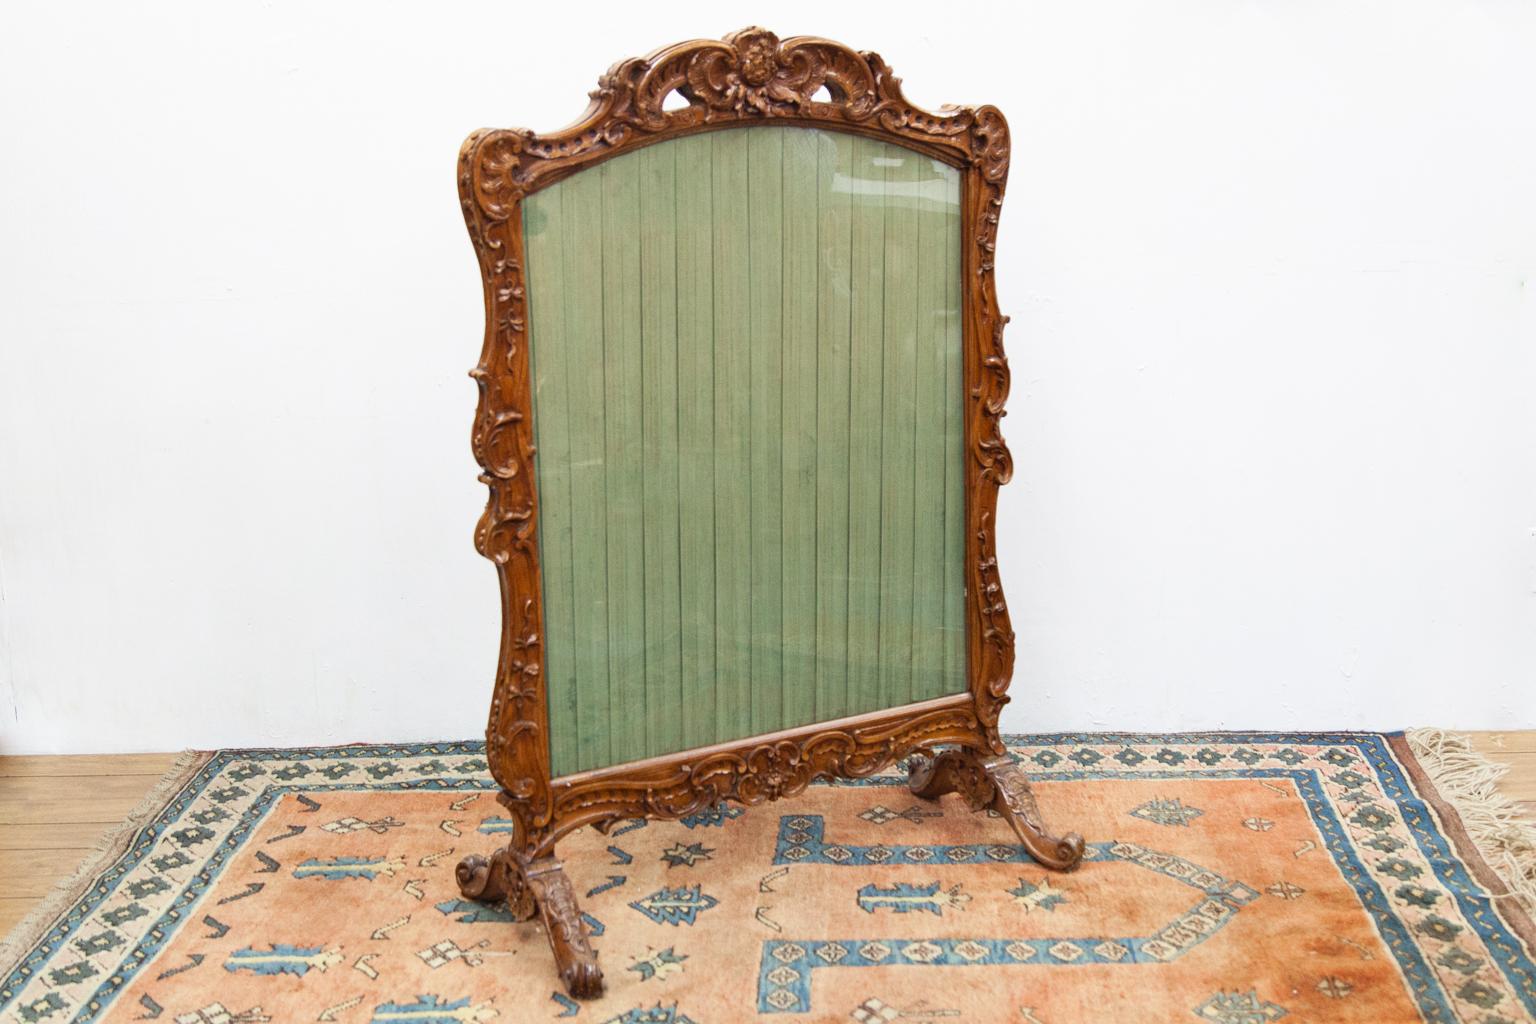 French carved walnut firescreen, with green pleated fabric. It is elaborately carved in high relief on the front and back. Only the front has a glass cover.